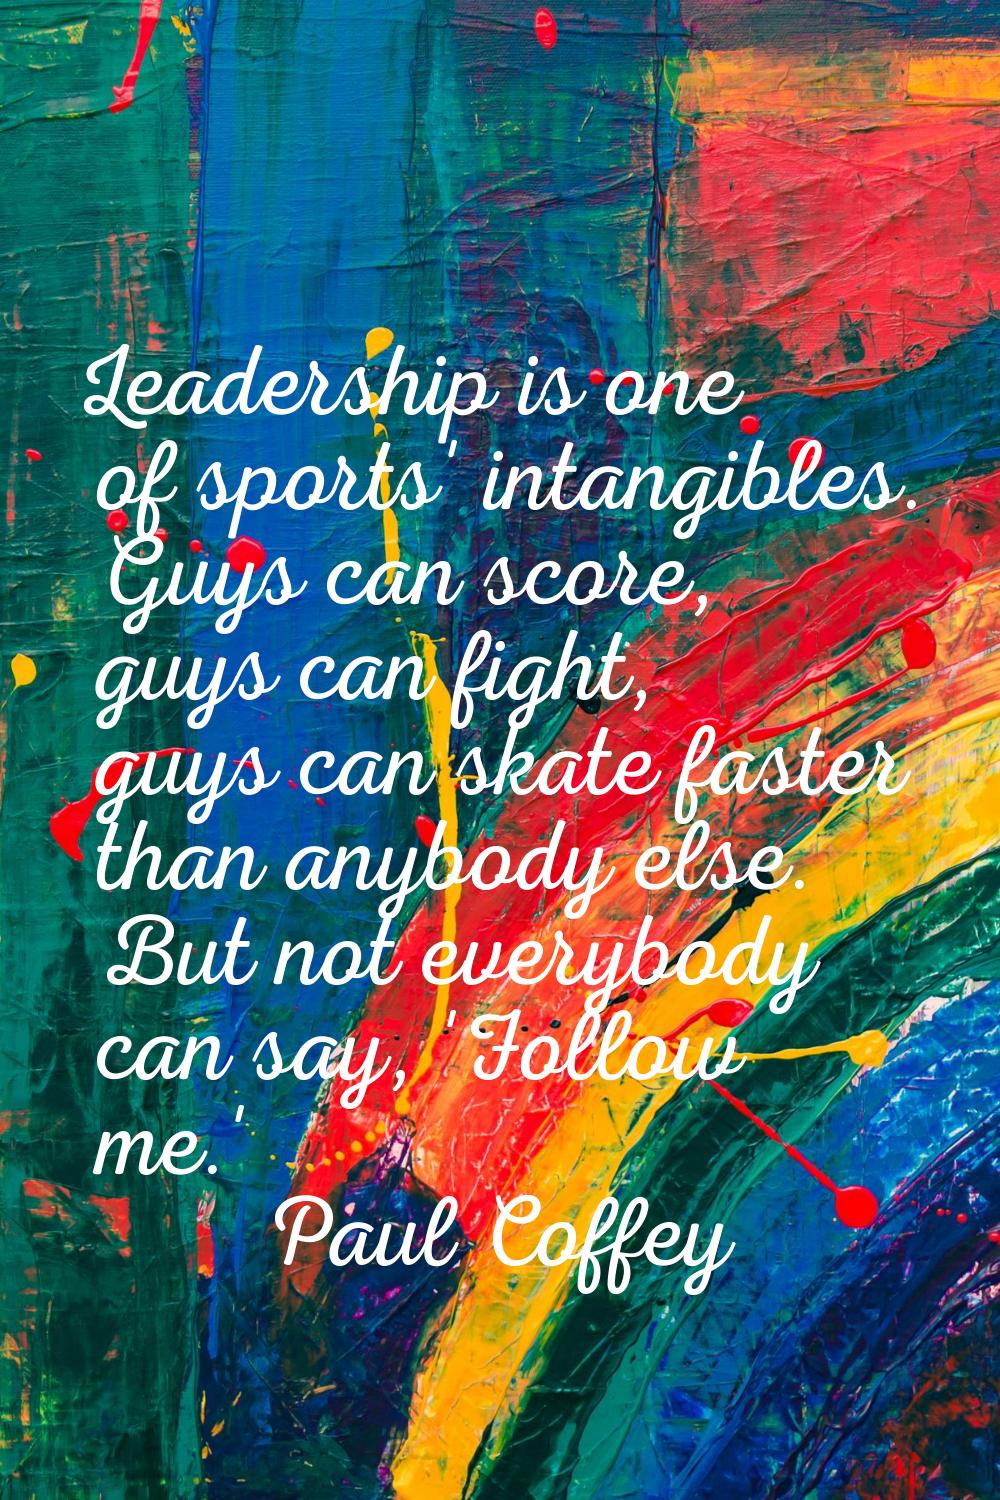 Leadership is one of sports' intangibles. Guys can score, guys can fight, guys can skate faster tha